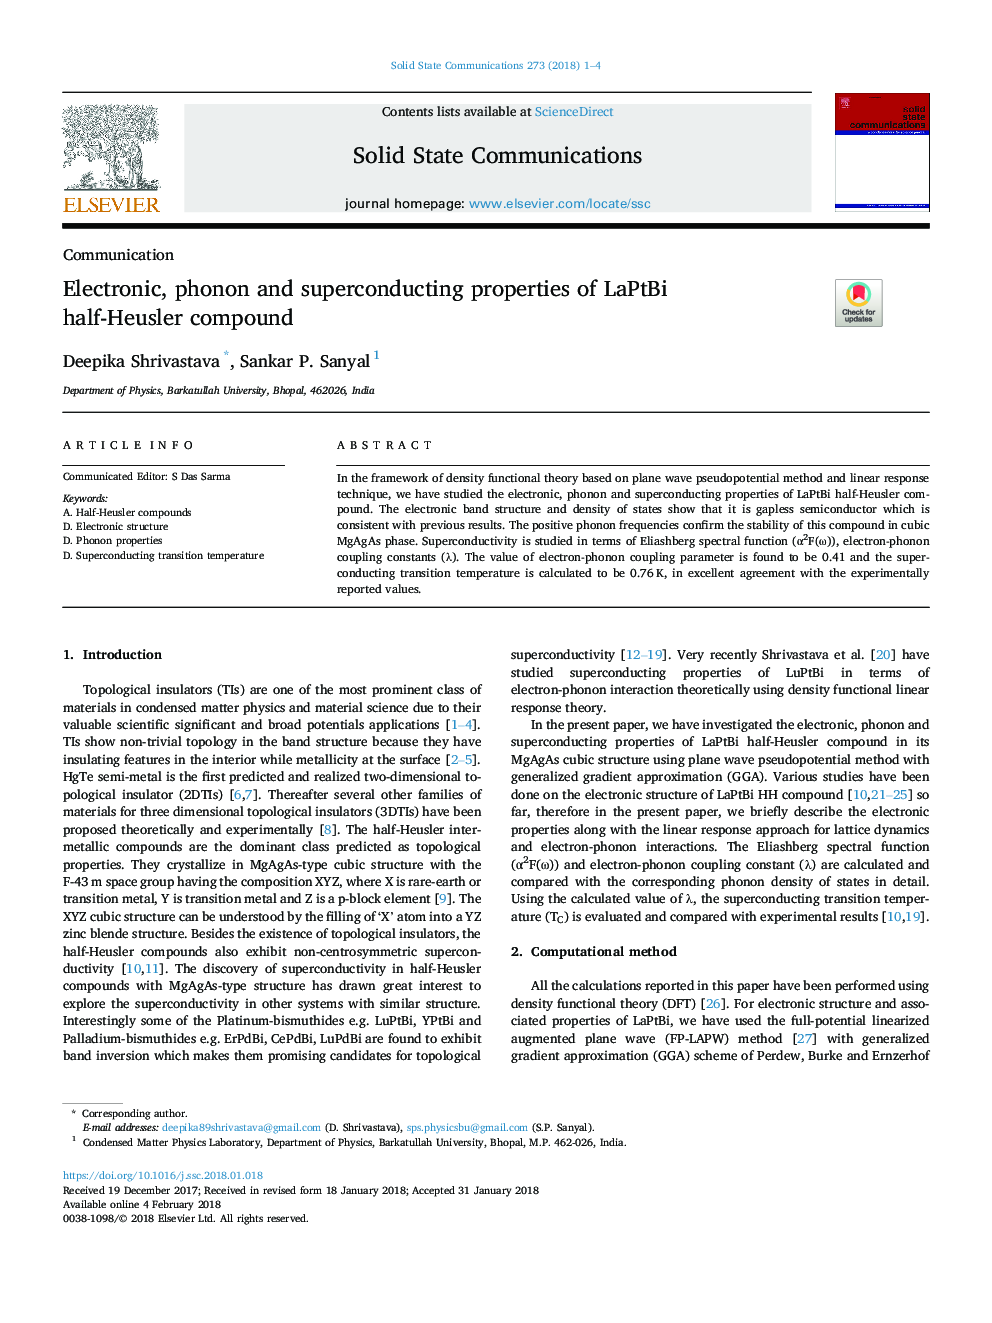 Electronic, phonon and superconducting properties of LaPtBi half-Heusler compound